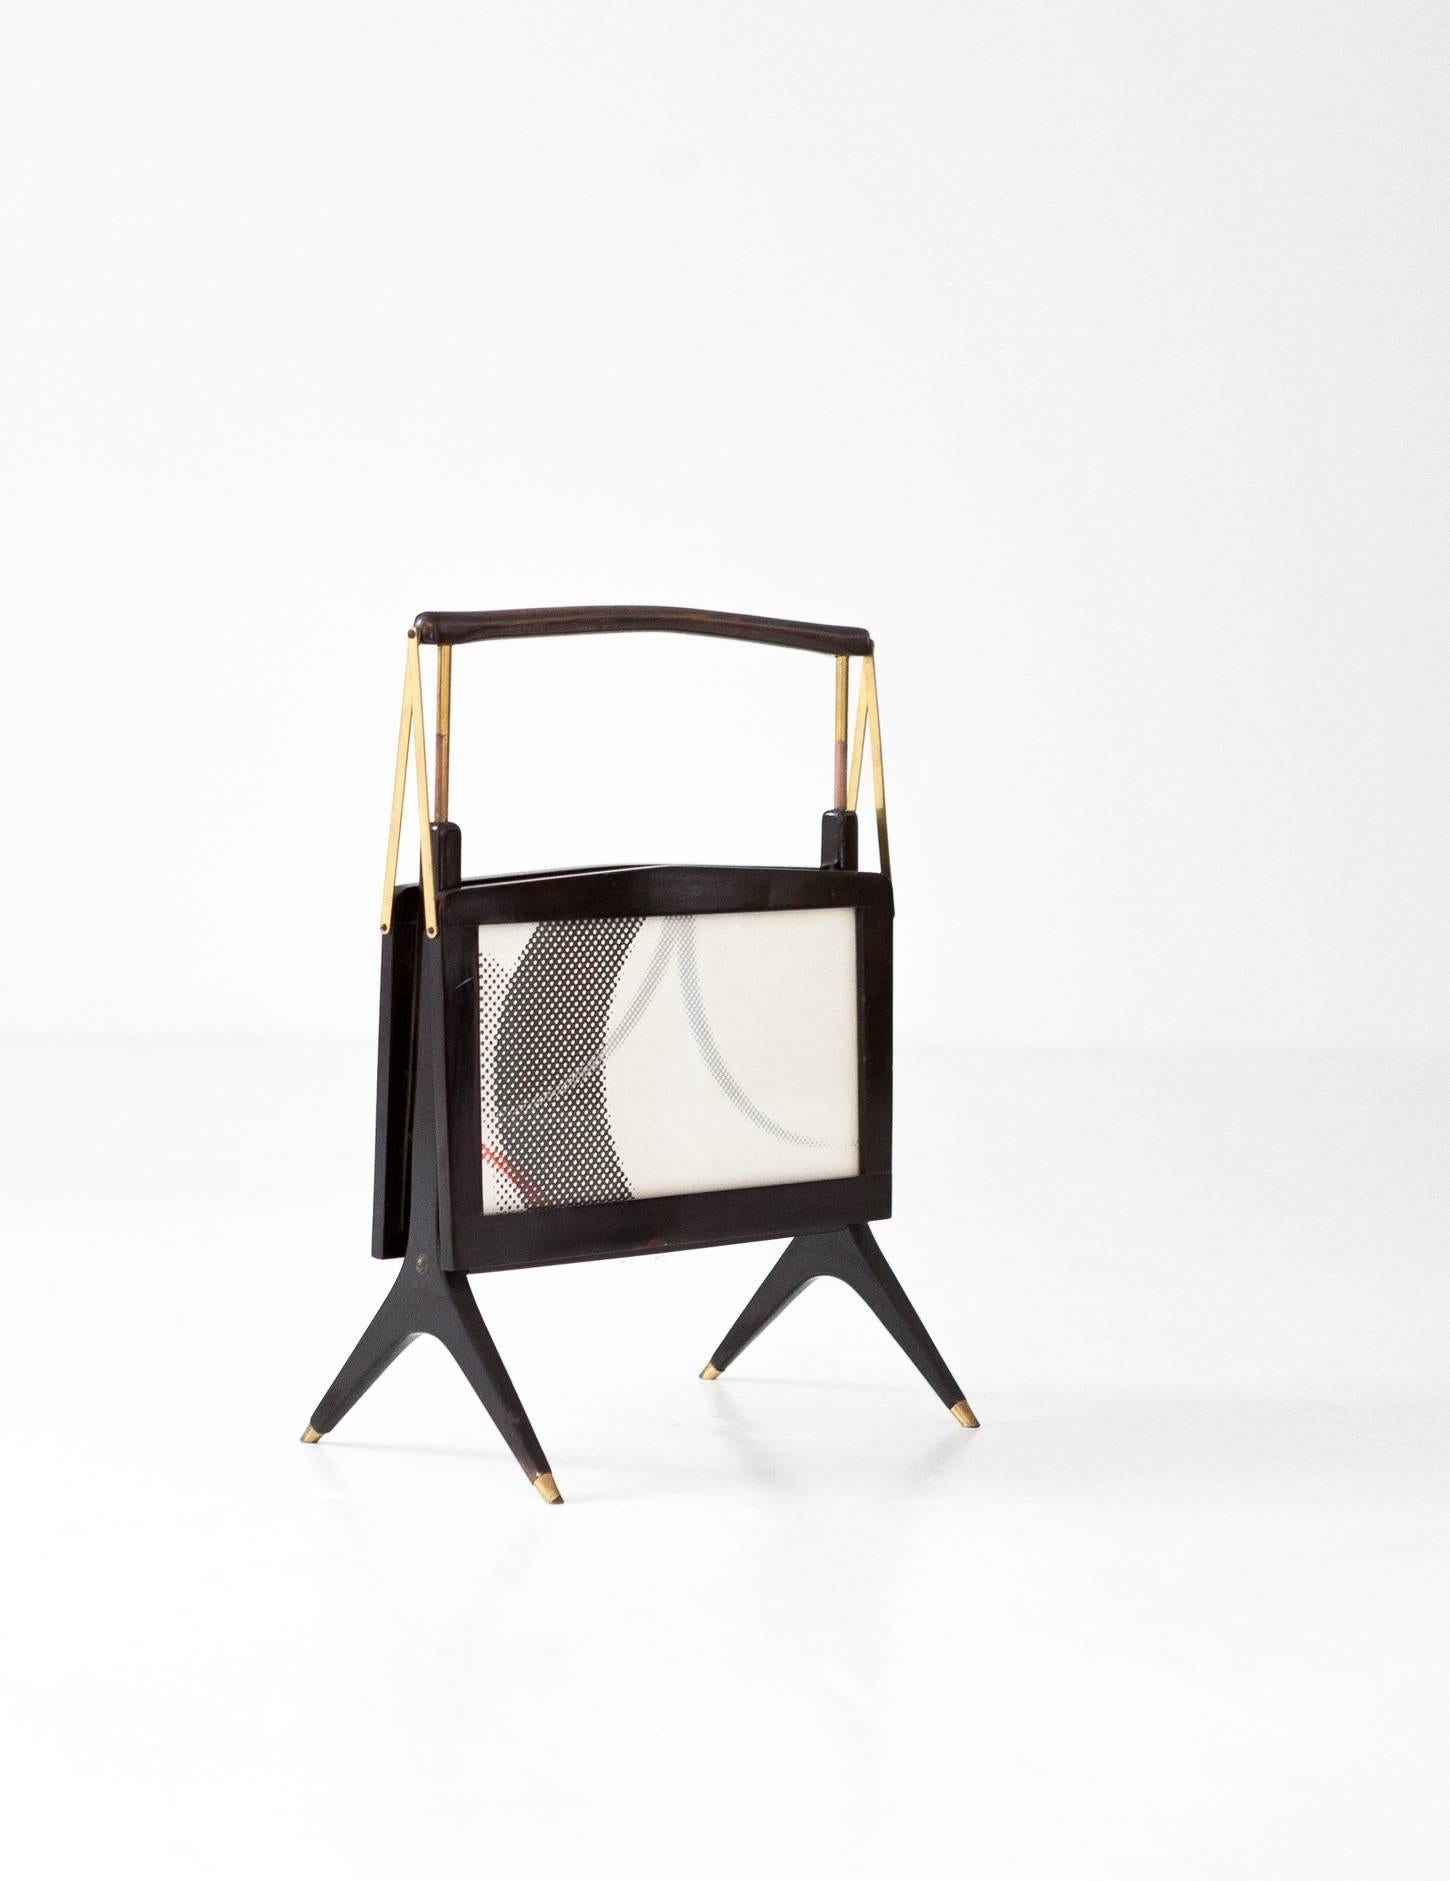 This magazine rack was designed and produced in Italy during the 1950s. The piece is made from wood, glass and brass and is in an excellent vintage condition.